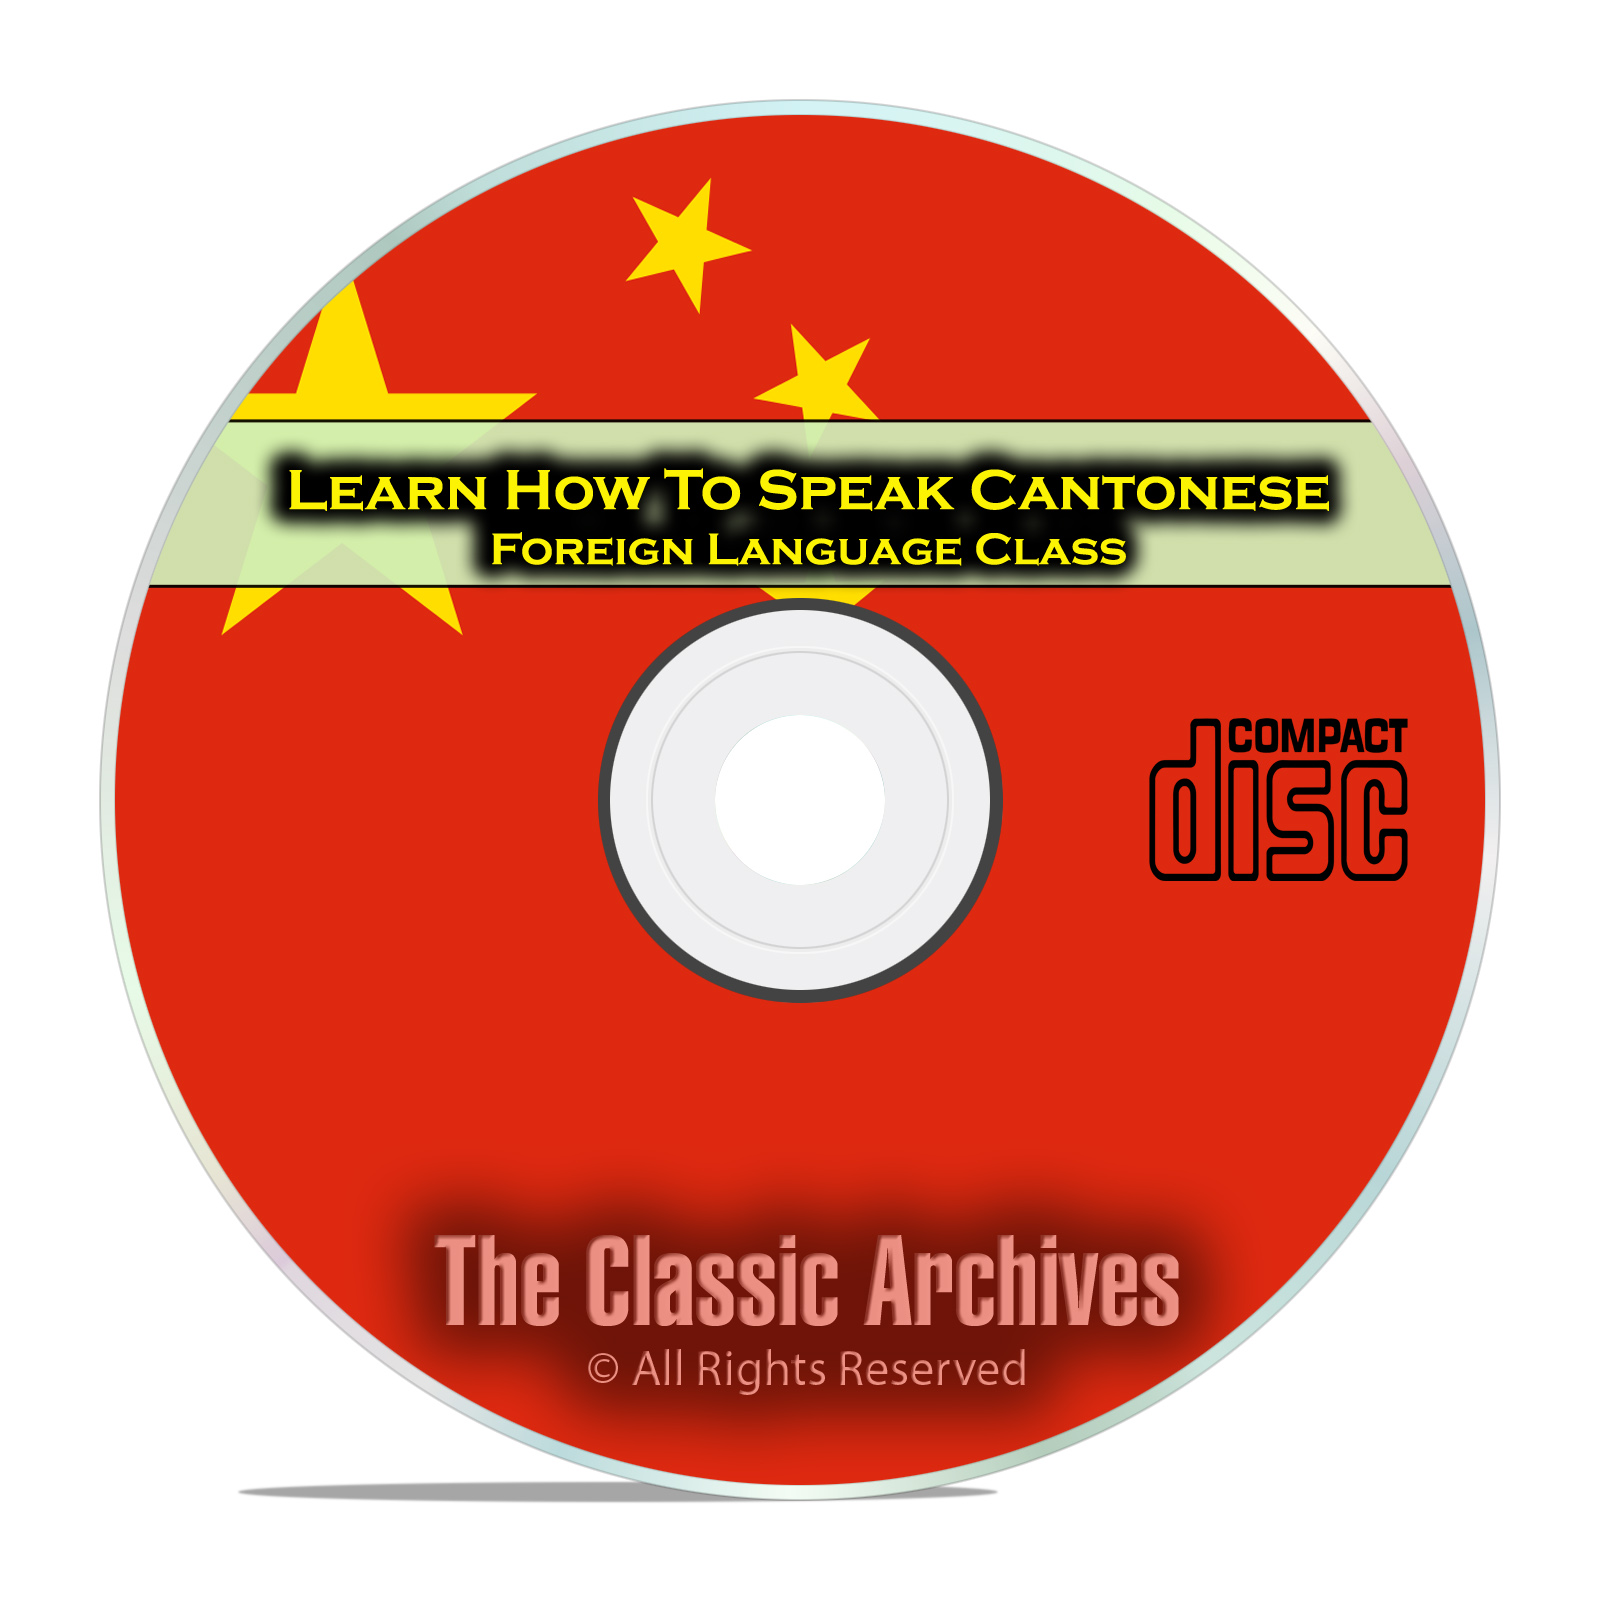 Learn How To Speak Cantonese, Fast Foreign Language Training Course, CD